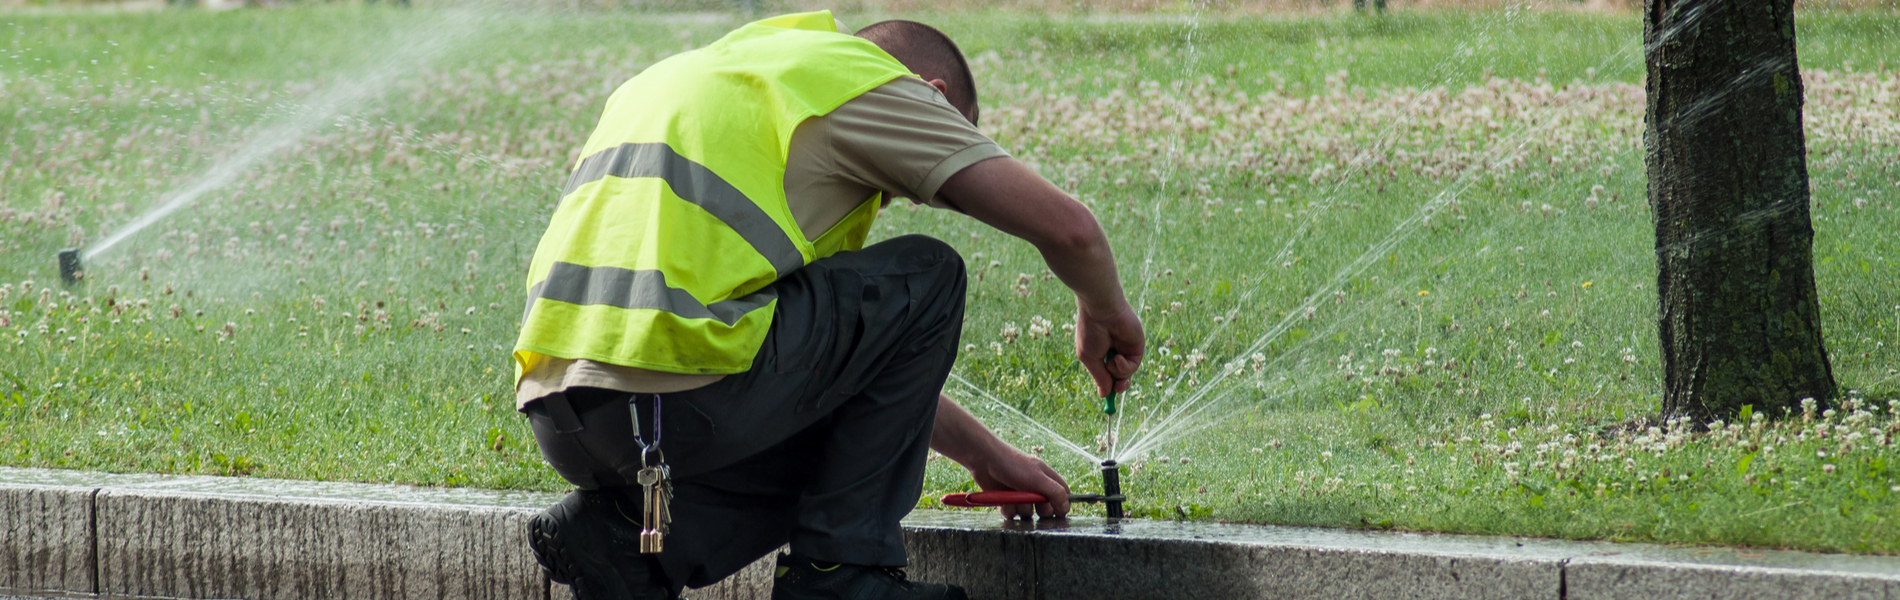 Winchester, MO irrigation repair | professional Winchester, MO irrigation repair services | Lawn Sprinklers St. Louis